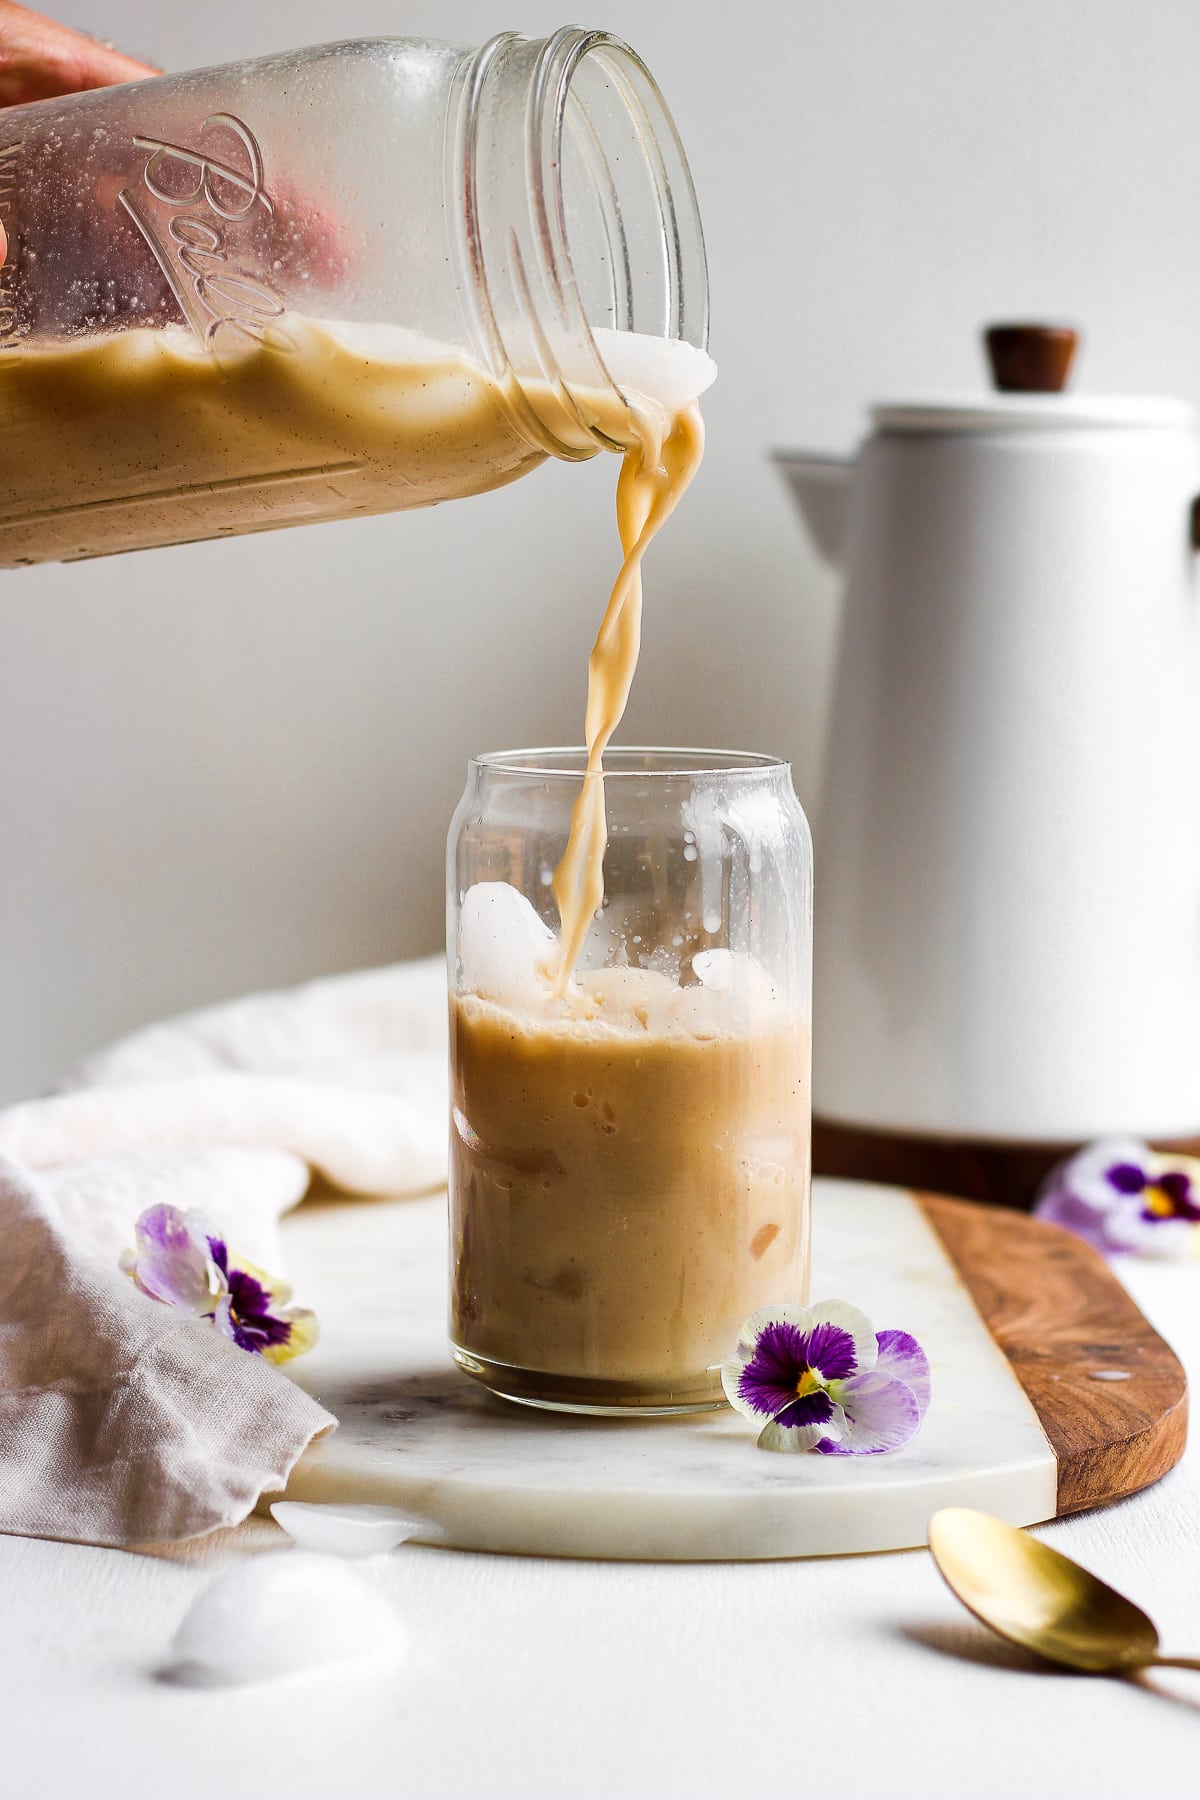 https://thewoodenskillet.com/wp-content/uploads/2018/07/Iced-Cold-Brew-Bulletrpoof-edited-6.jpg